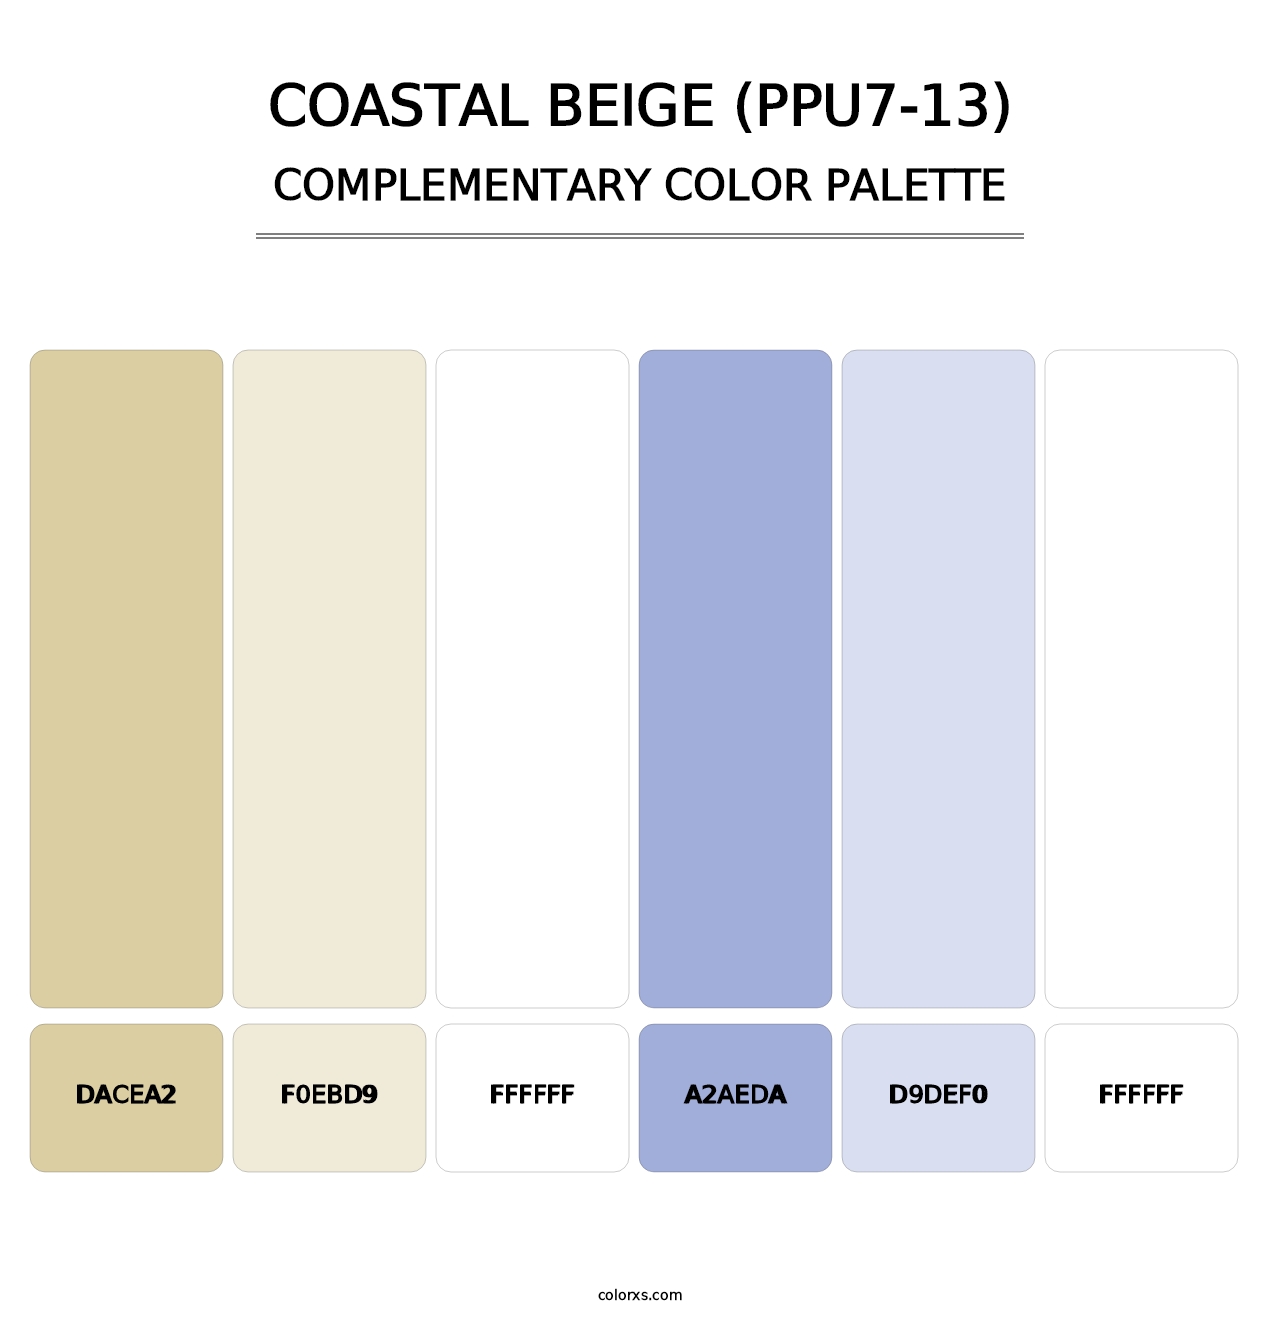 Coastal Beige (PPU7-13) - Complementary Color Palette